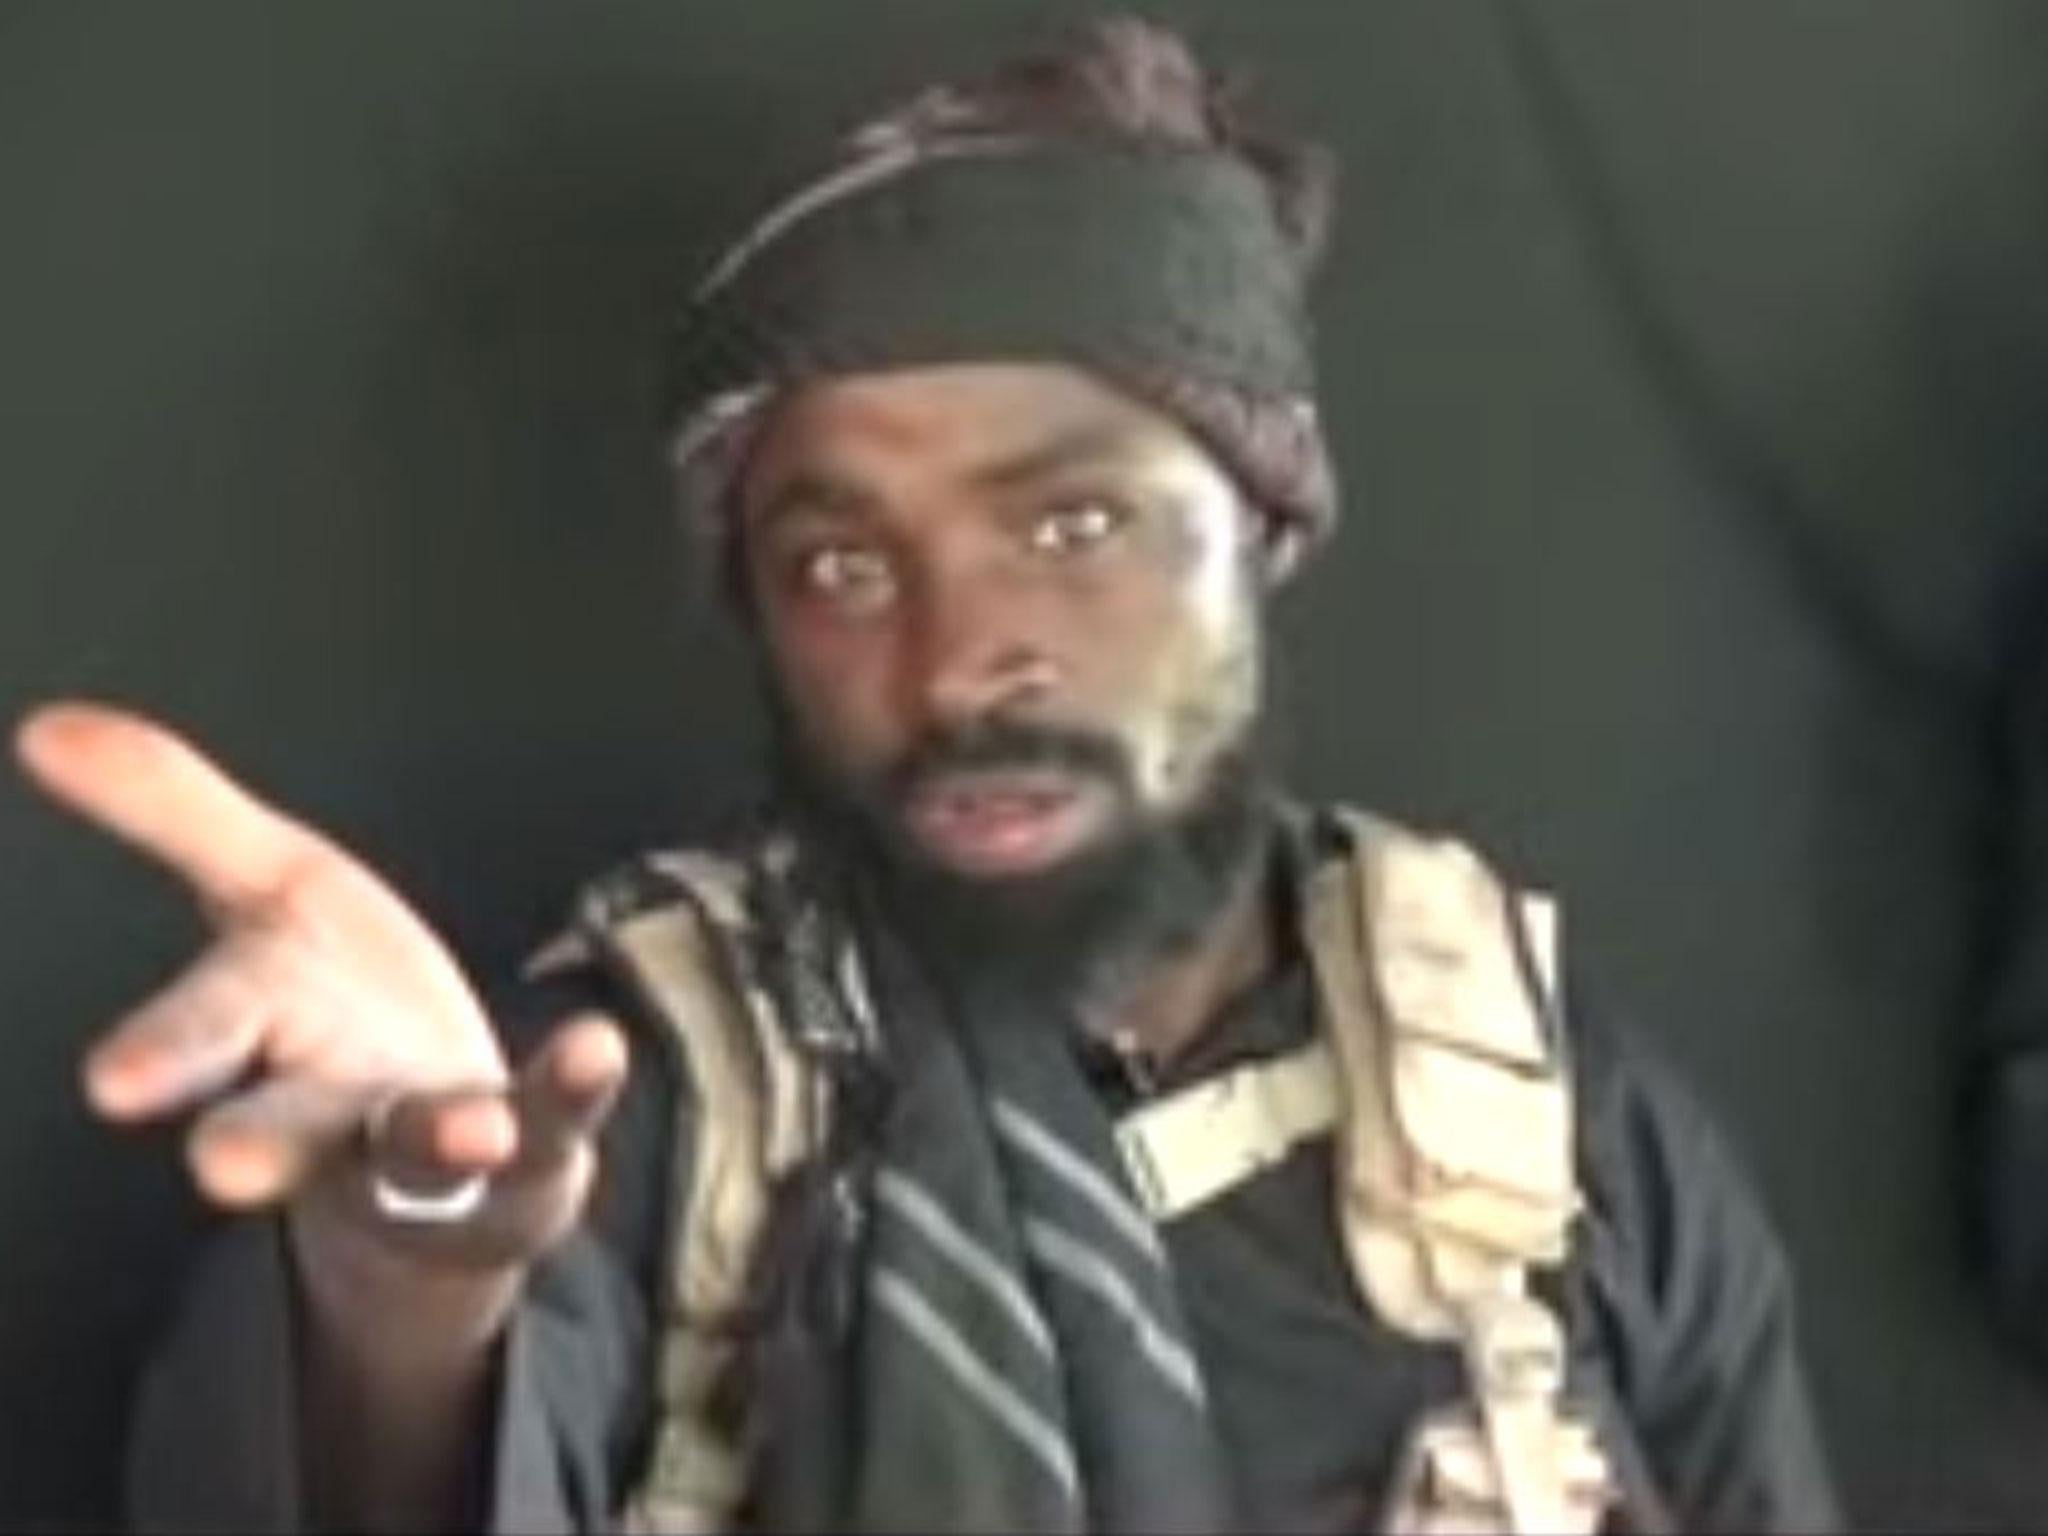 ‘Oh tyrants, I’m in a happy state, in good health and in safety,’ Shekau says in the video